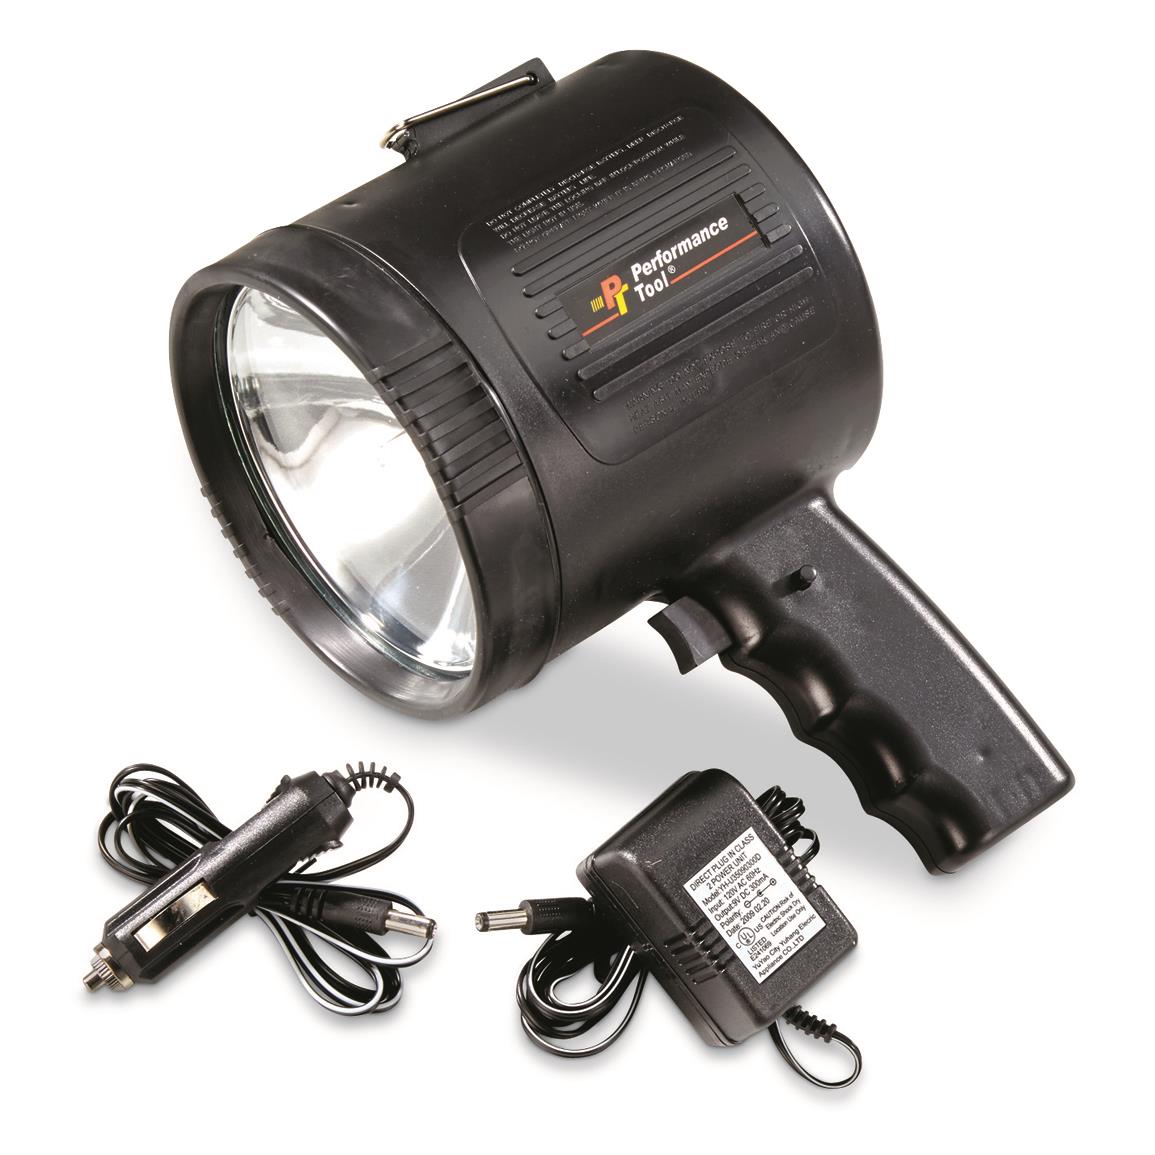 NEW 3.5 MILLION CANDLE POWER LED TORCH SPOTLIGHT HALOGEN FLASHLIGHT RECHARGEABLE 